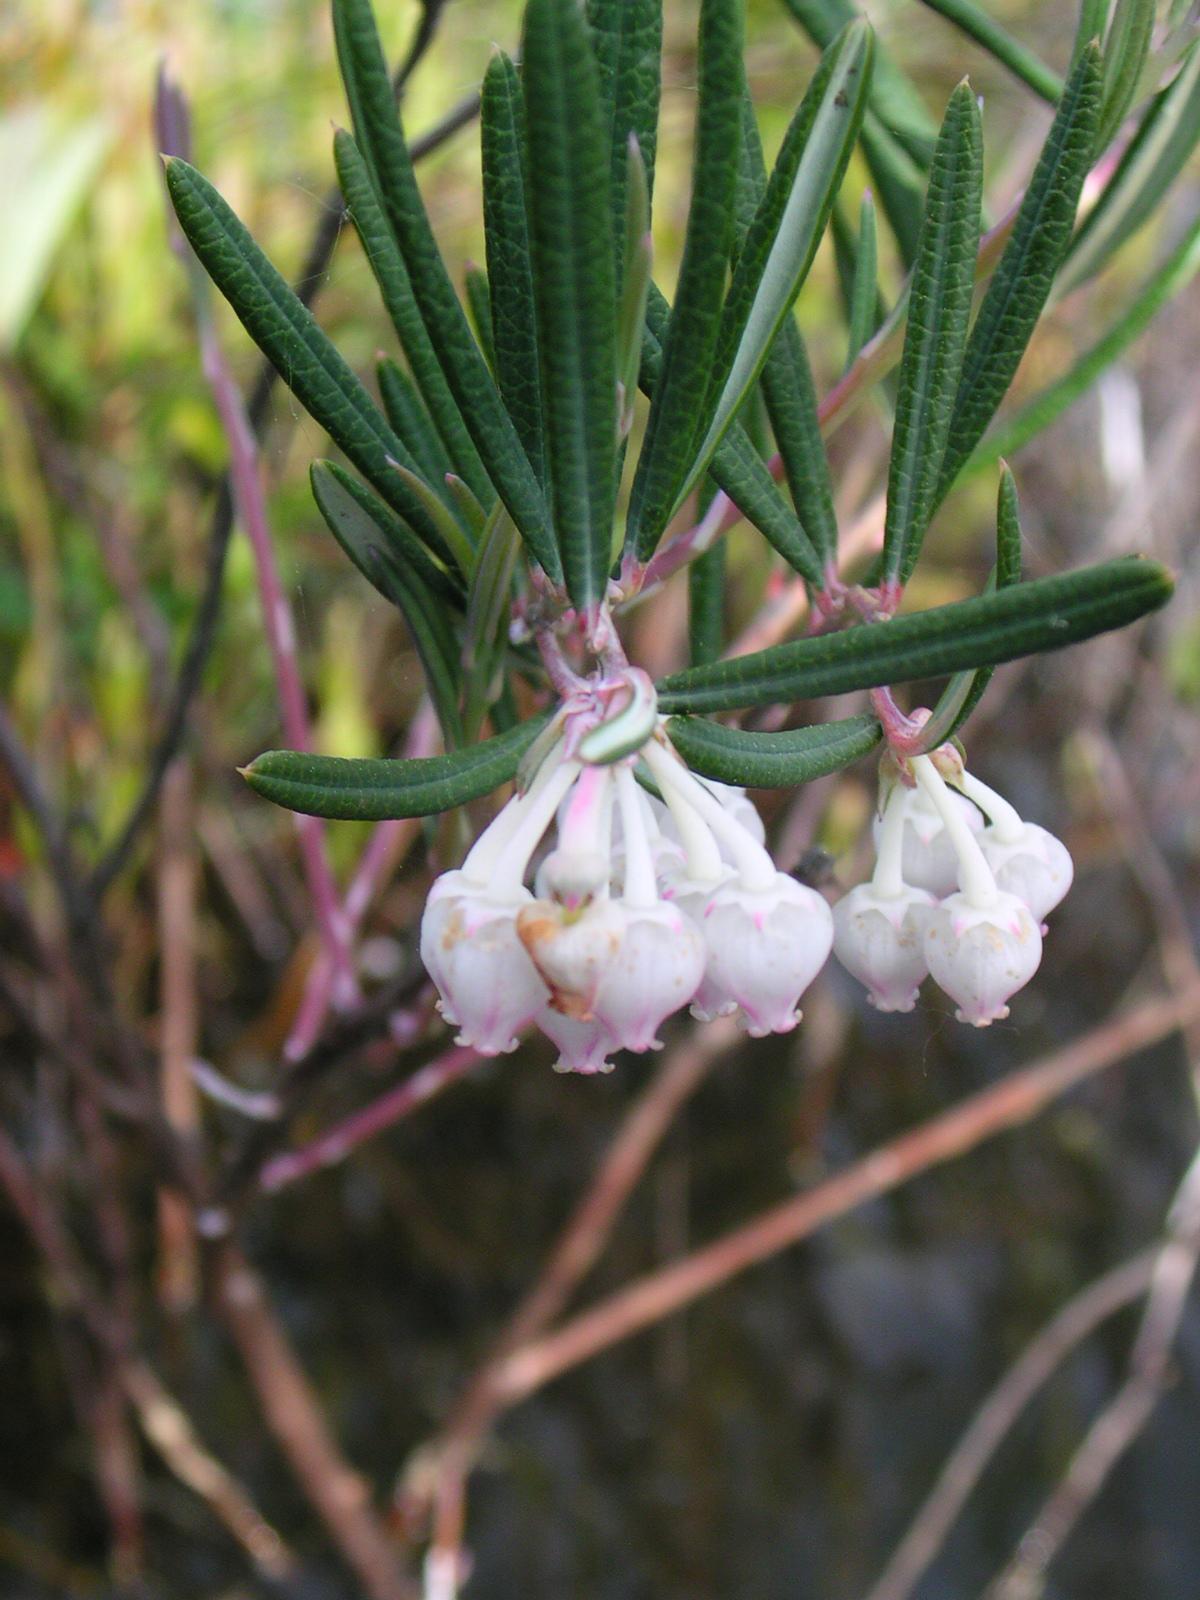 white-pink flowers with dark-green foliage and brown stems
